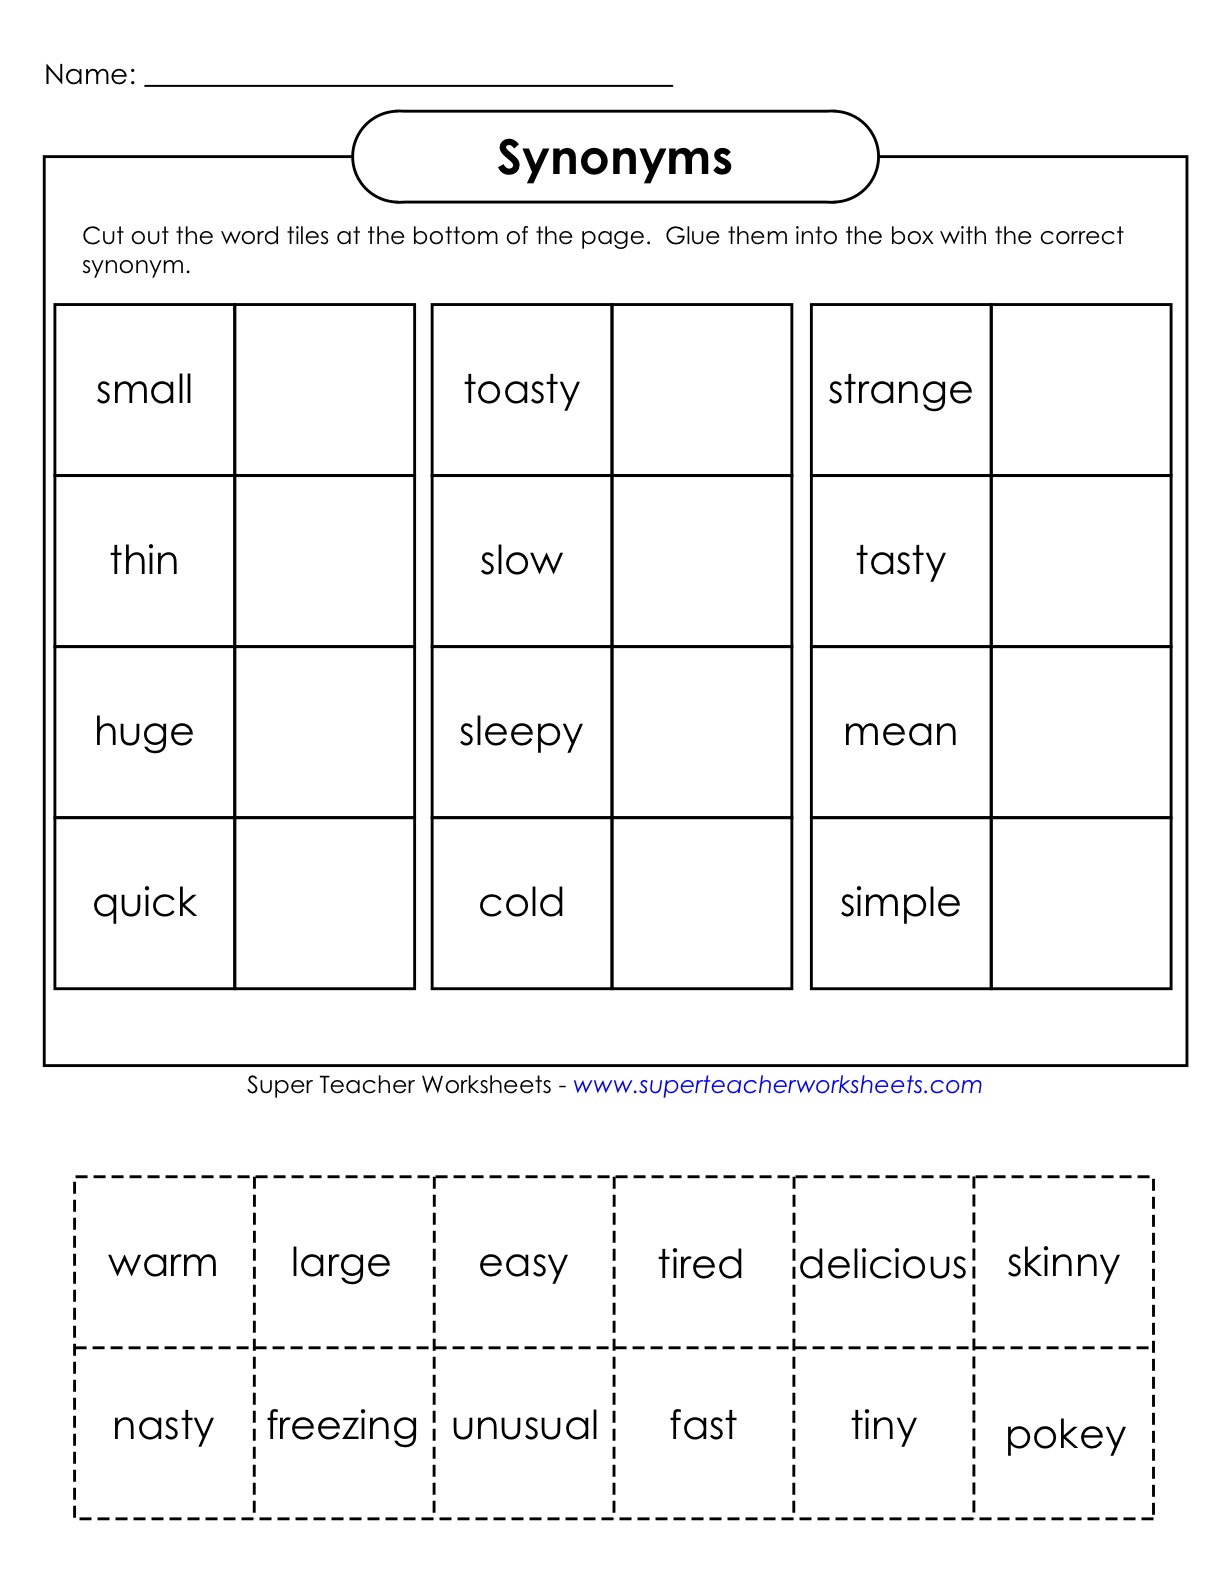 adjectives-verbs-synonyms-antonyms-and-opposites-esl-worksheet-by